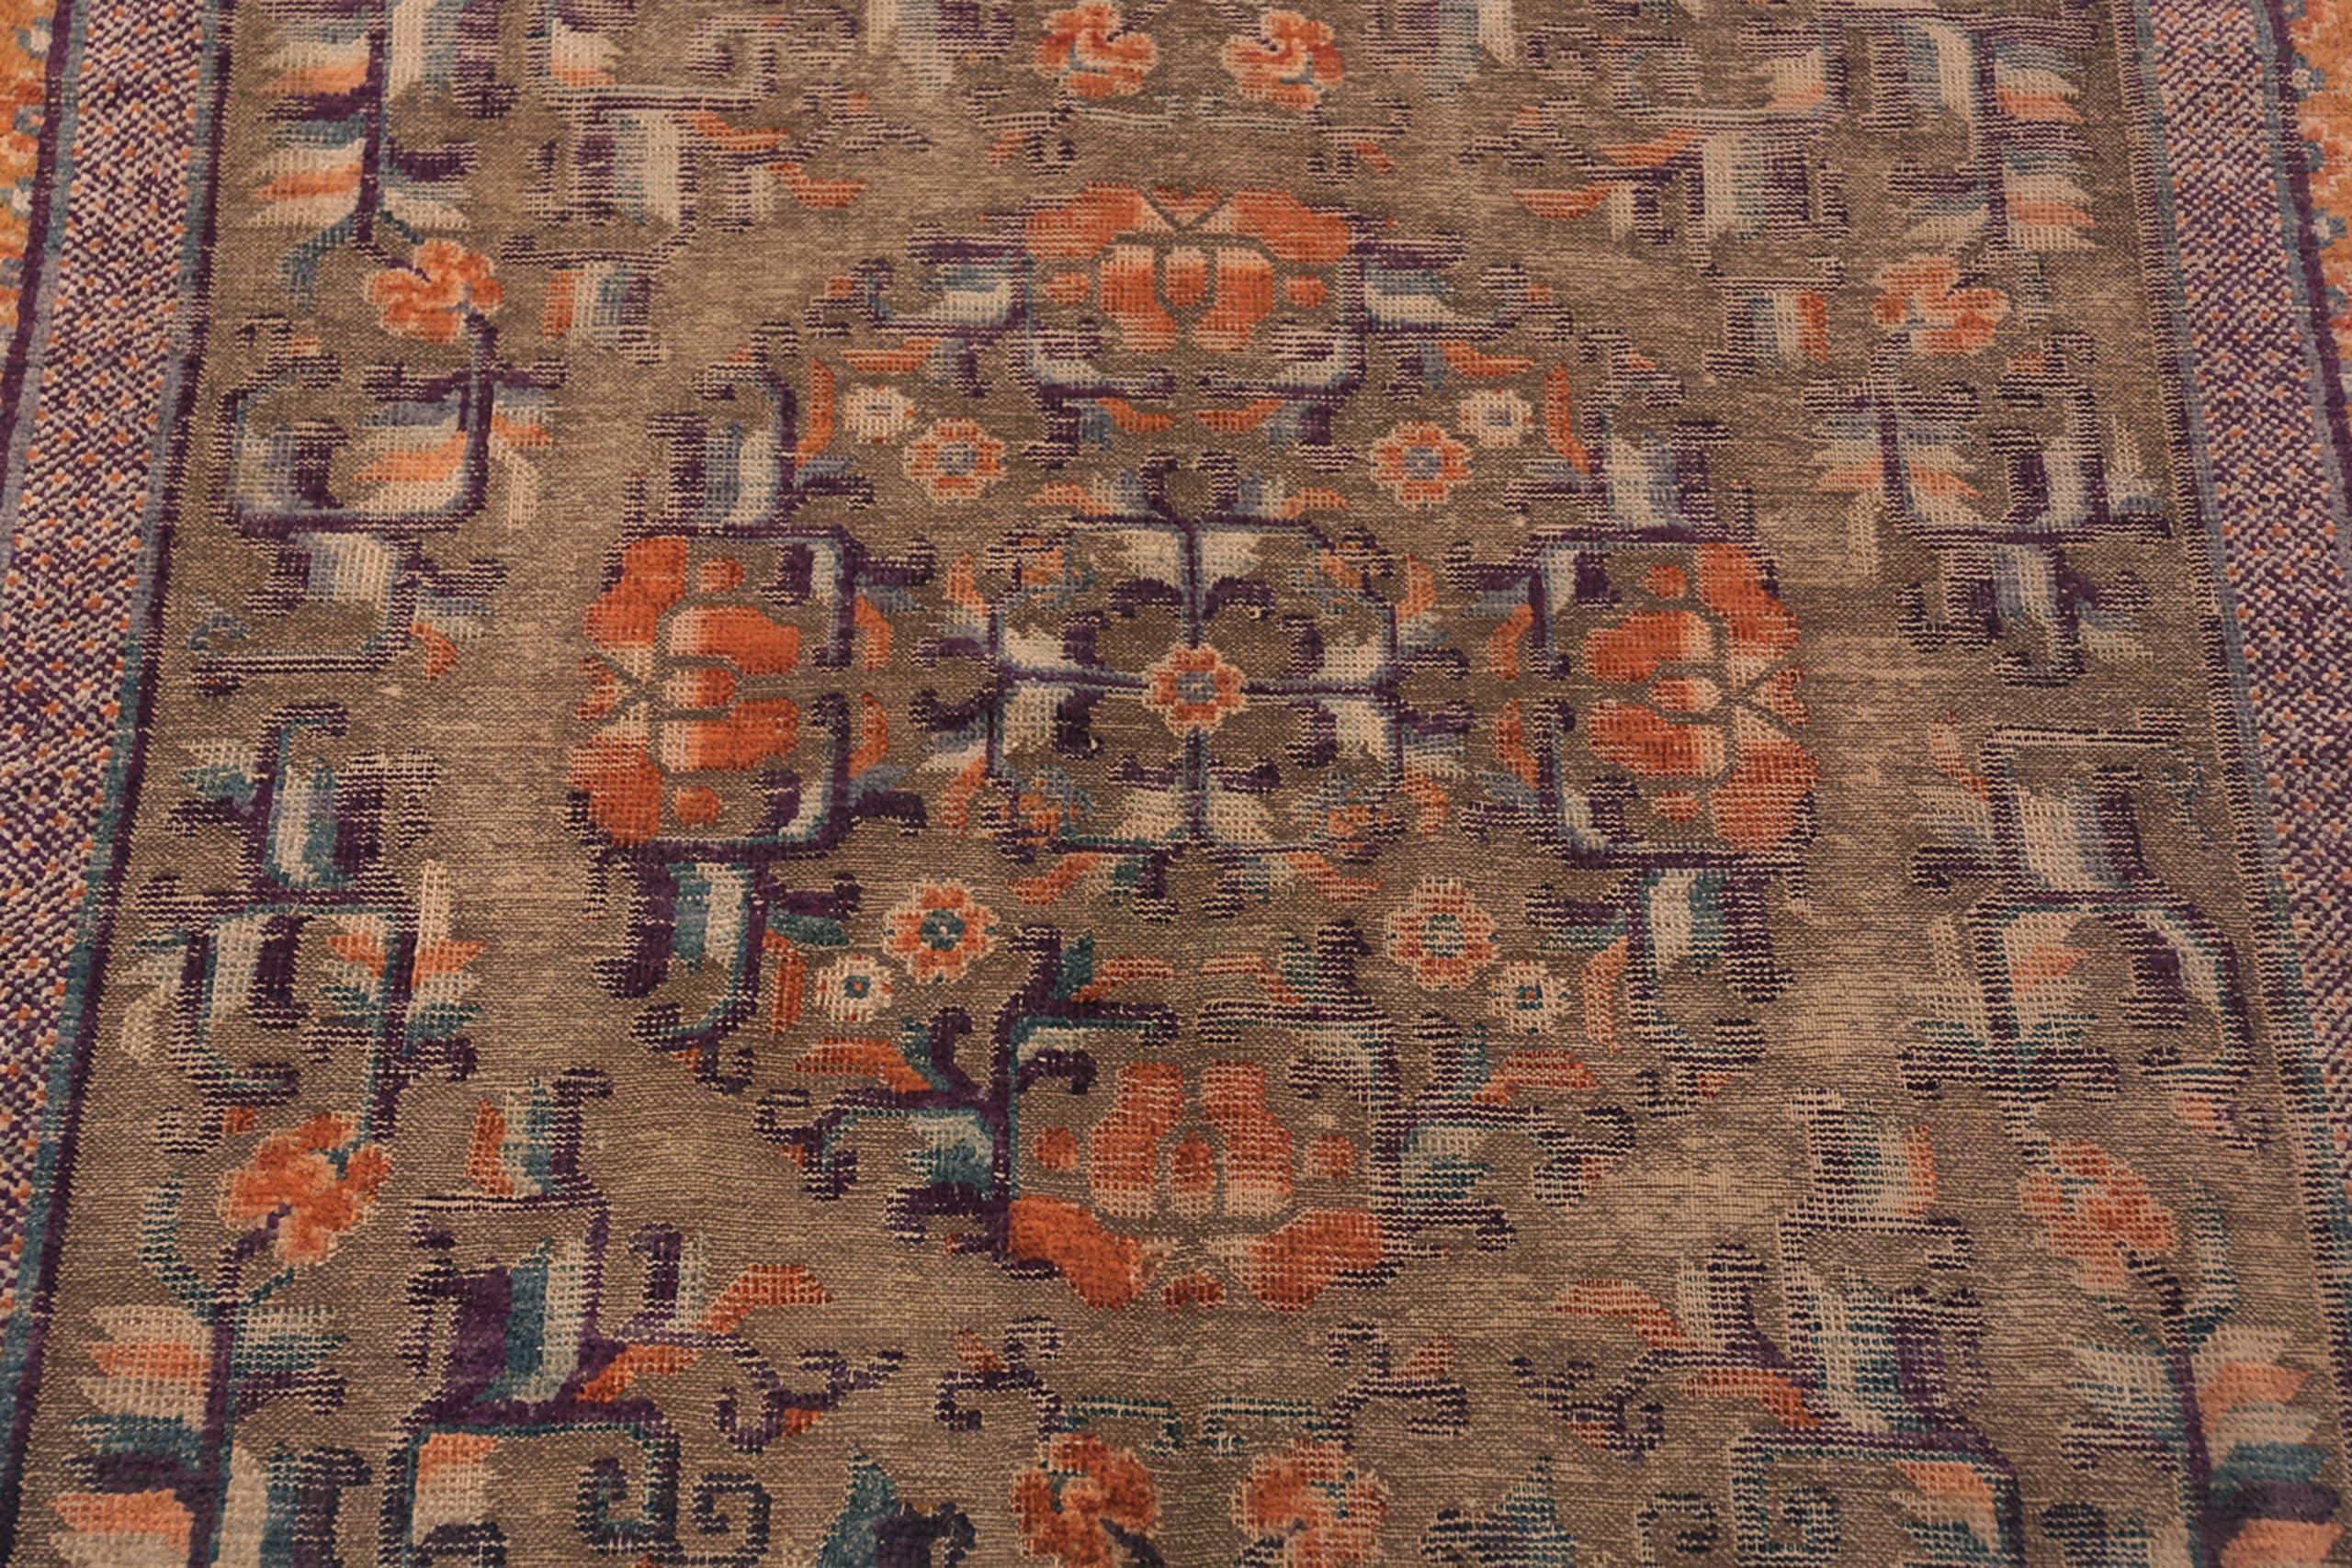 Magnificent Rare And Collectible Antique Chinese Silk Rug 6' x 9' For Sale 2